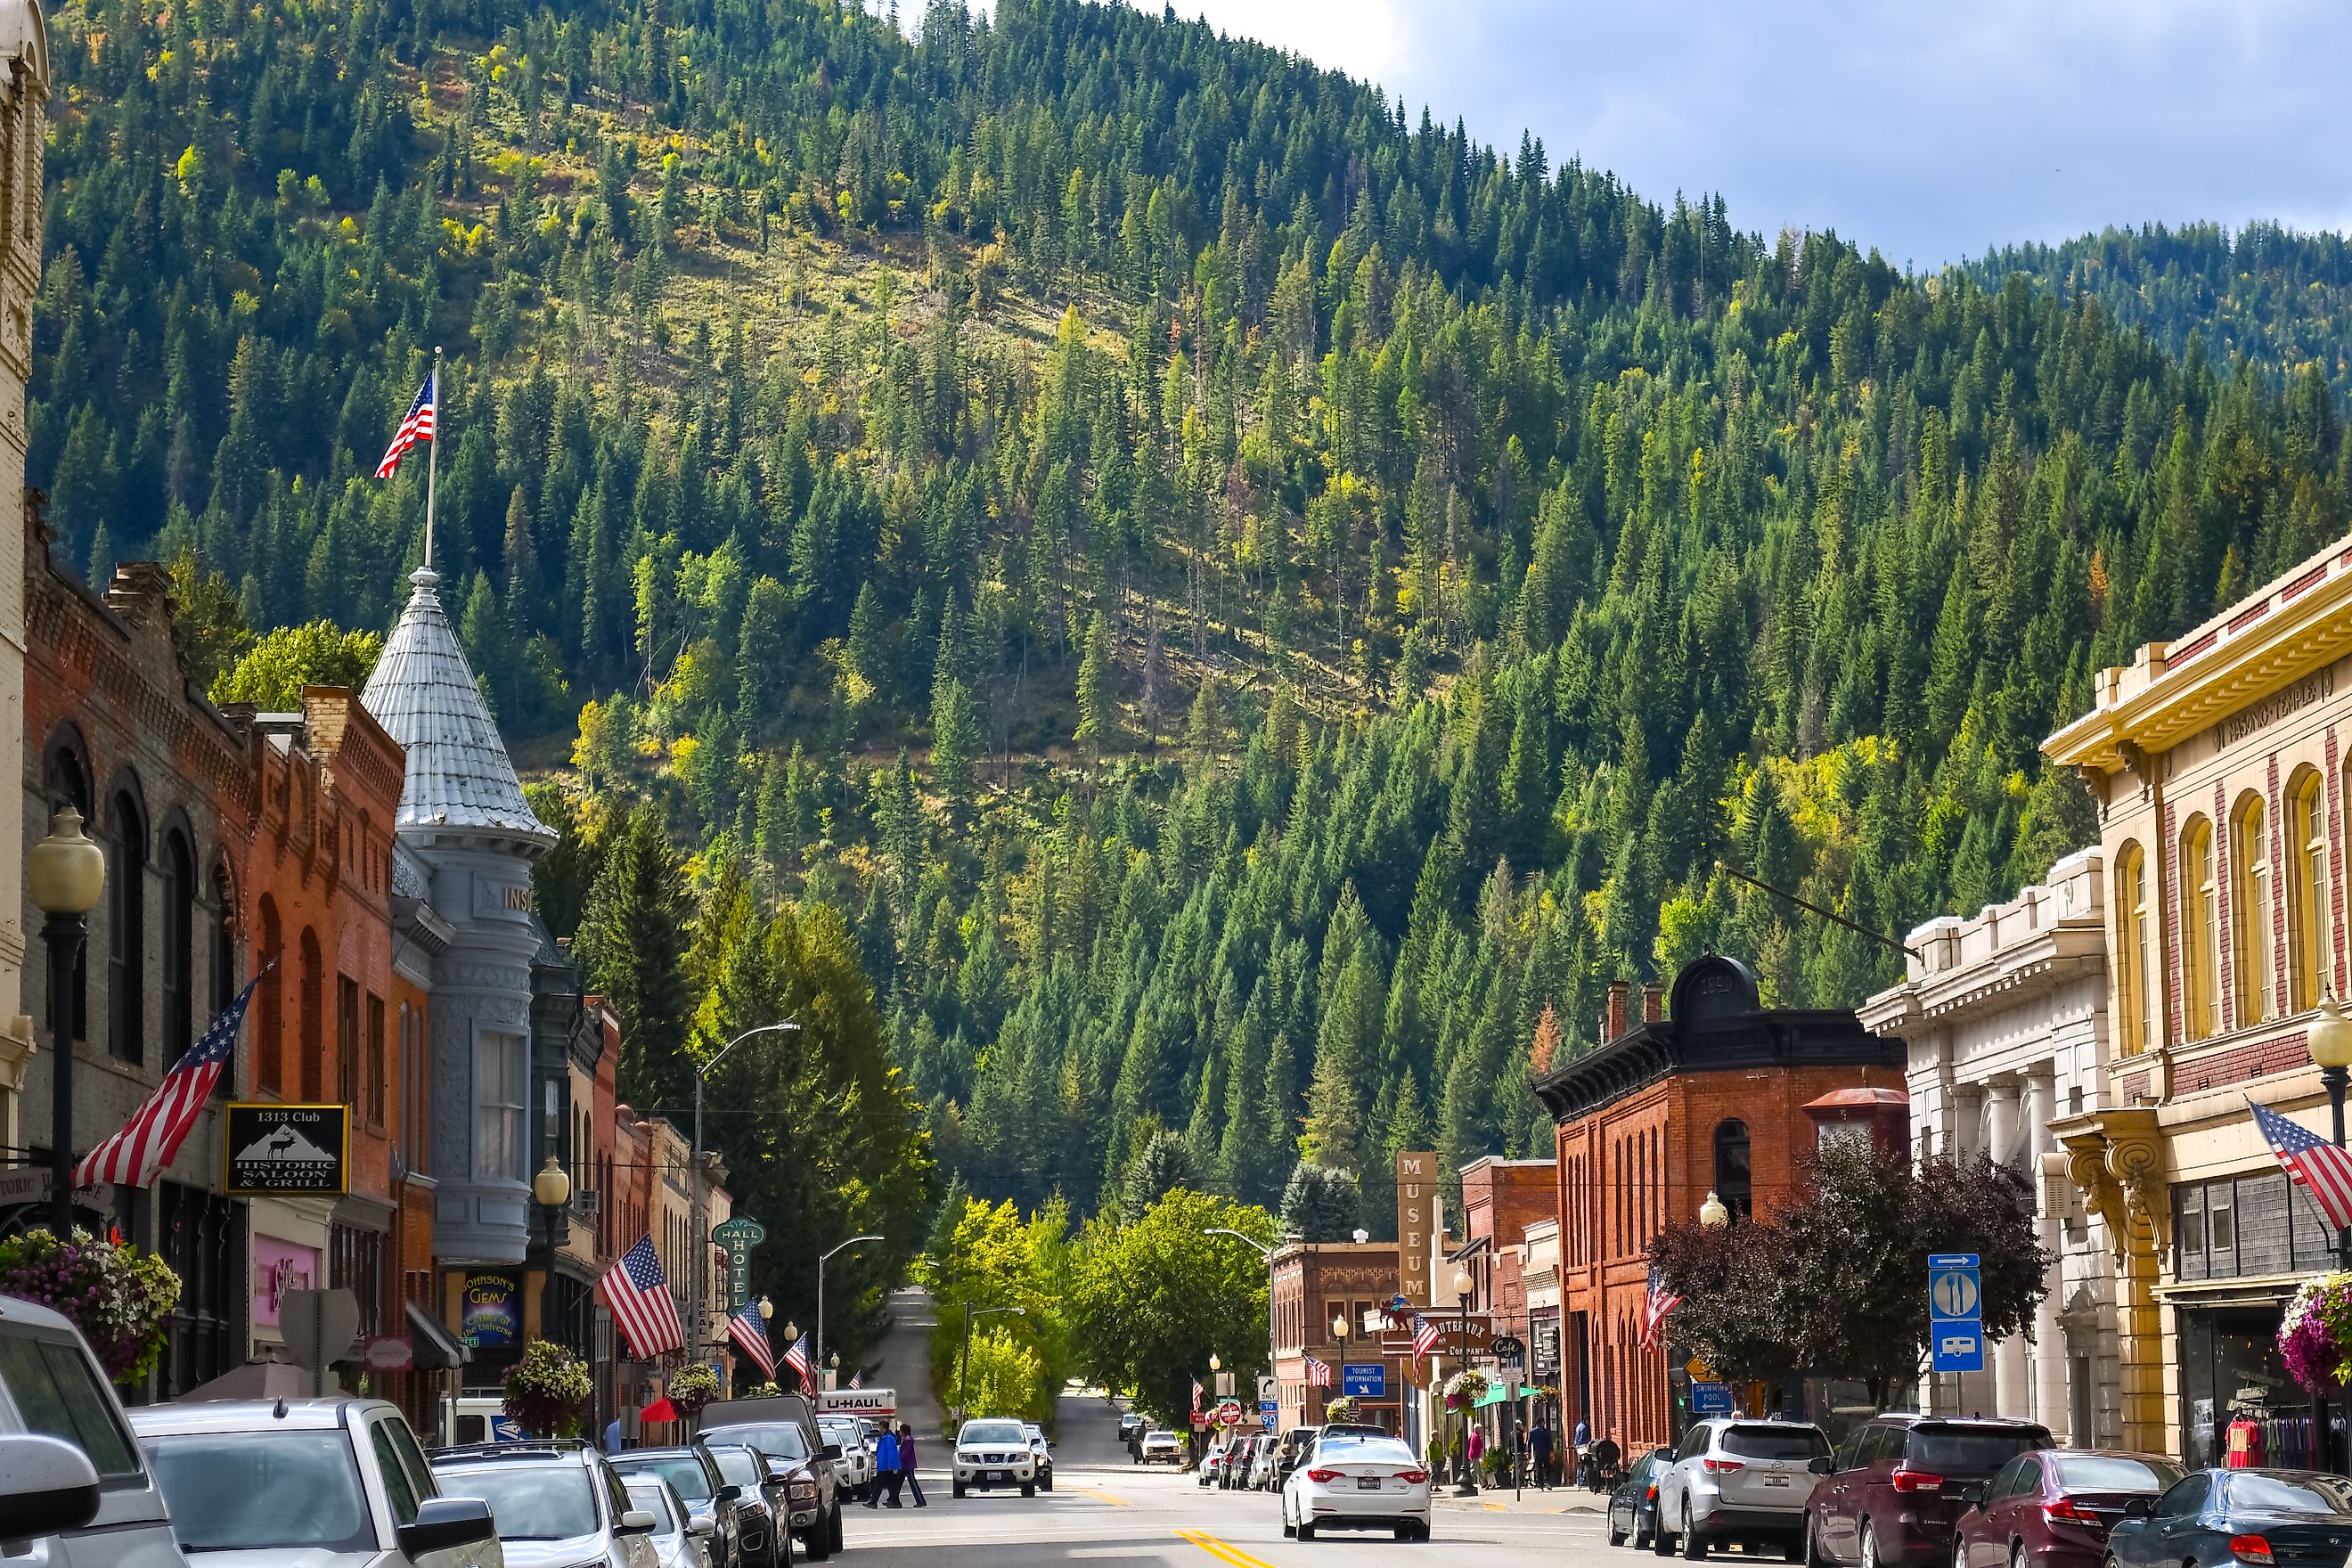 A picturesque main street in the historic mining town of Wallace, Idaho